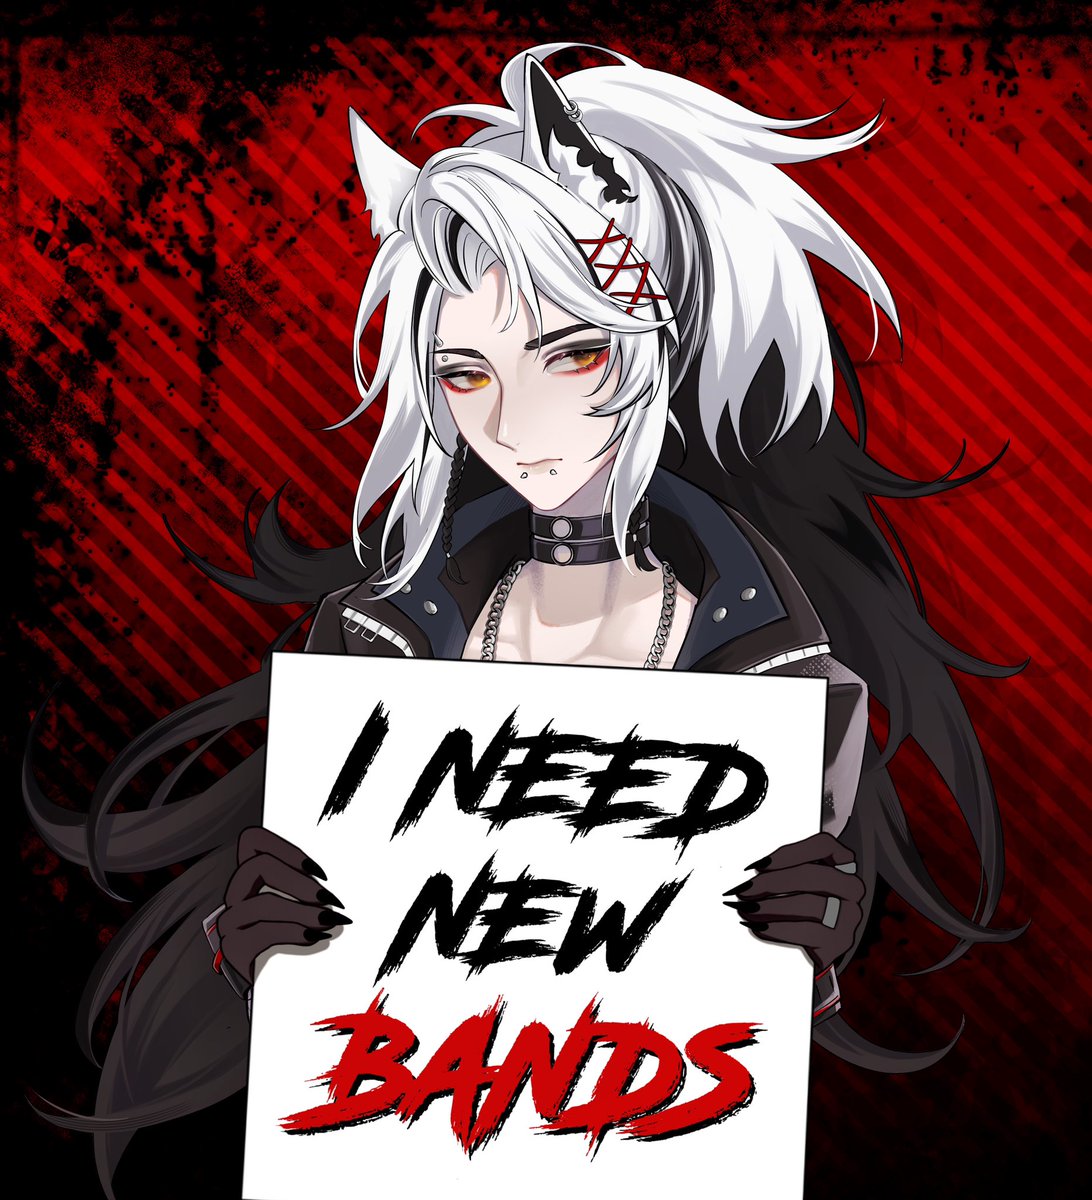 I’m always on the hunt for new badass bands and music 🎶 

Give me bands you think I should listen to along with your favorite song from that band via YouTube. 

If I get at least 20 bands I’ll make a stream of your picks  #newmusic #musicsharing #metalhead